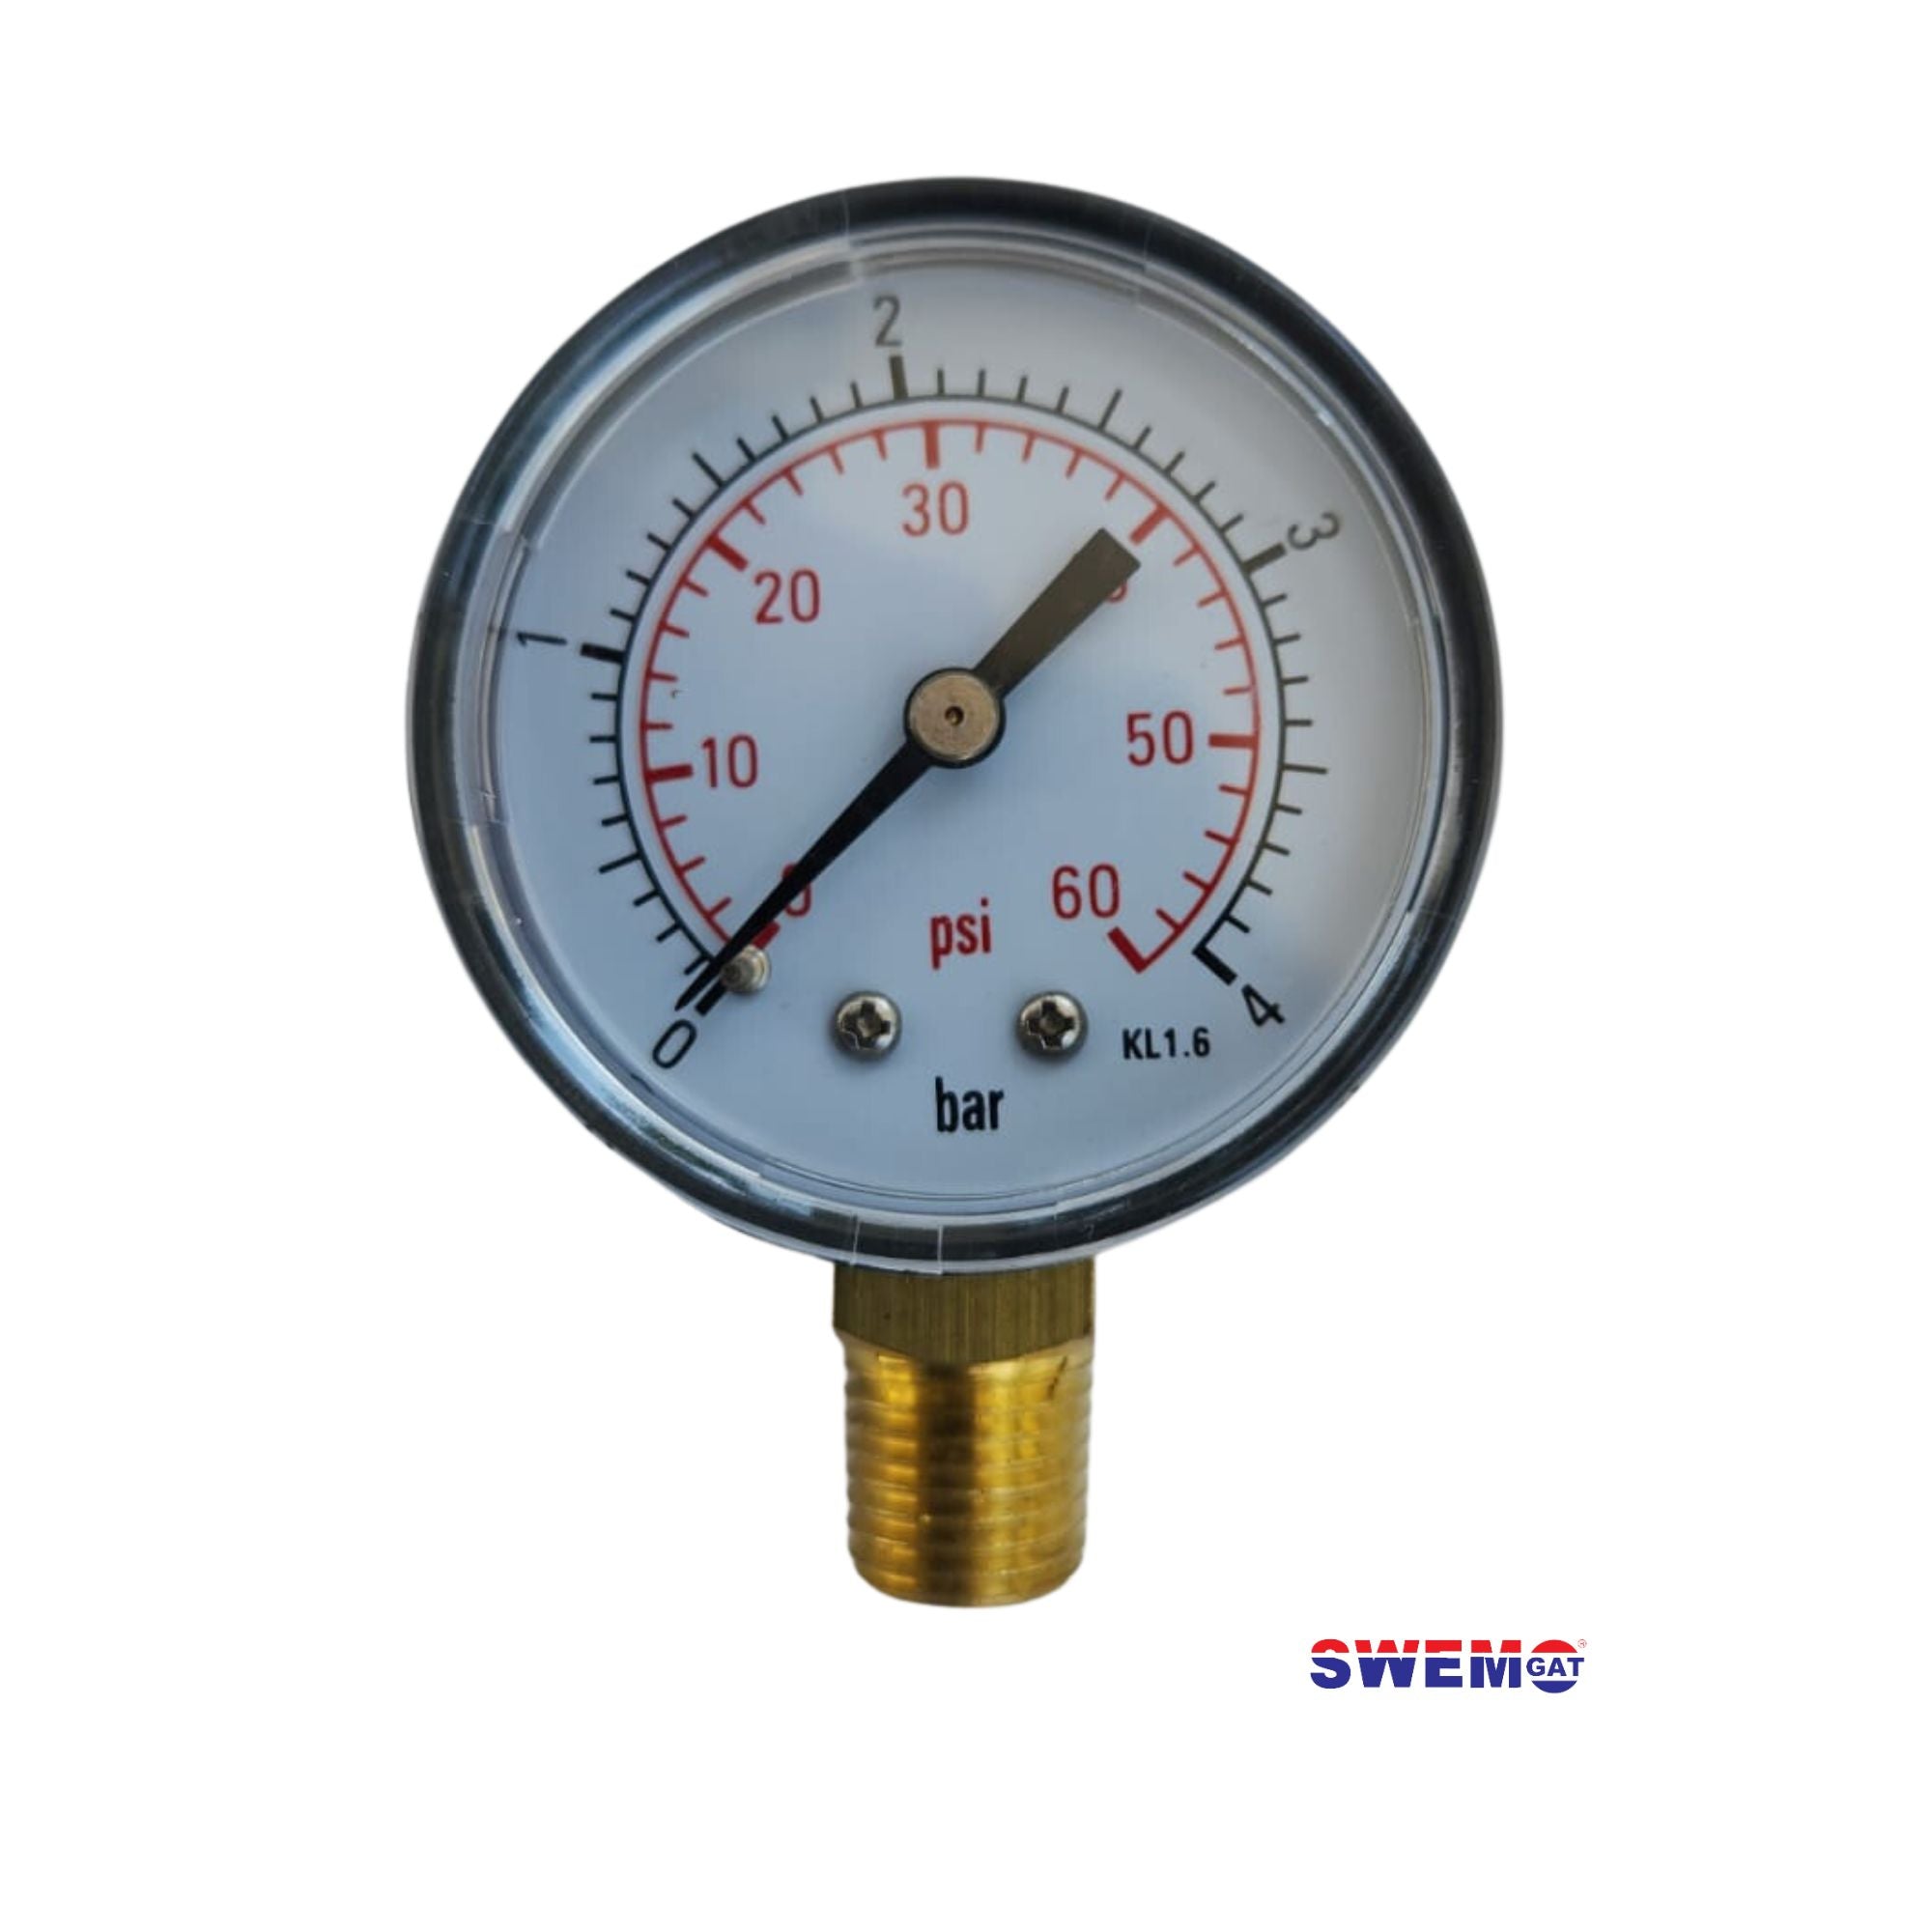 Pressure gauge for swimming pool sand filters - Save water! – Swemgat